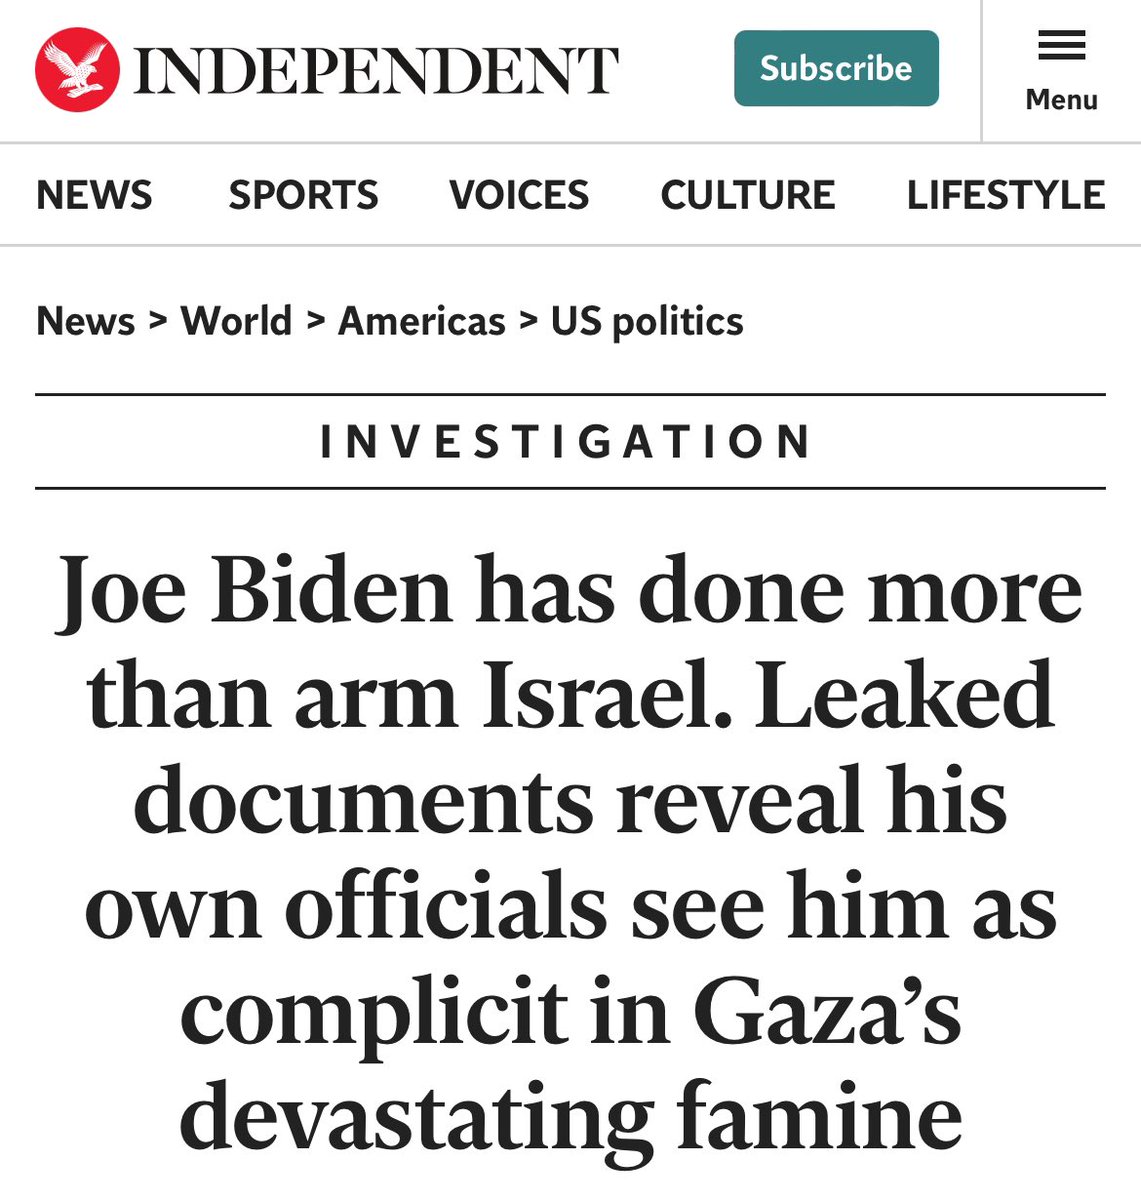 What an incredible headline. Devastating reporting on Biden’s personal complicity in Israel’s genocide. Link in comments.